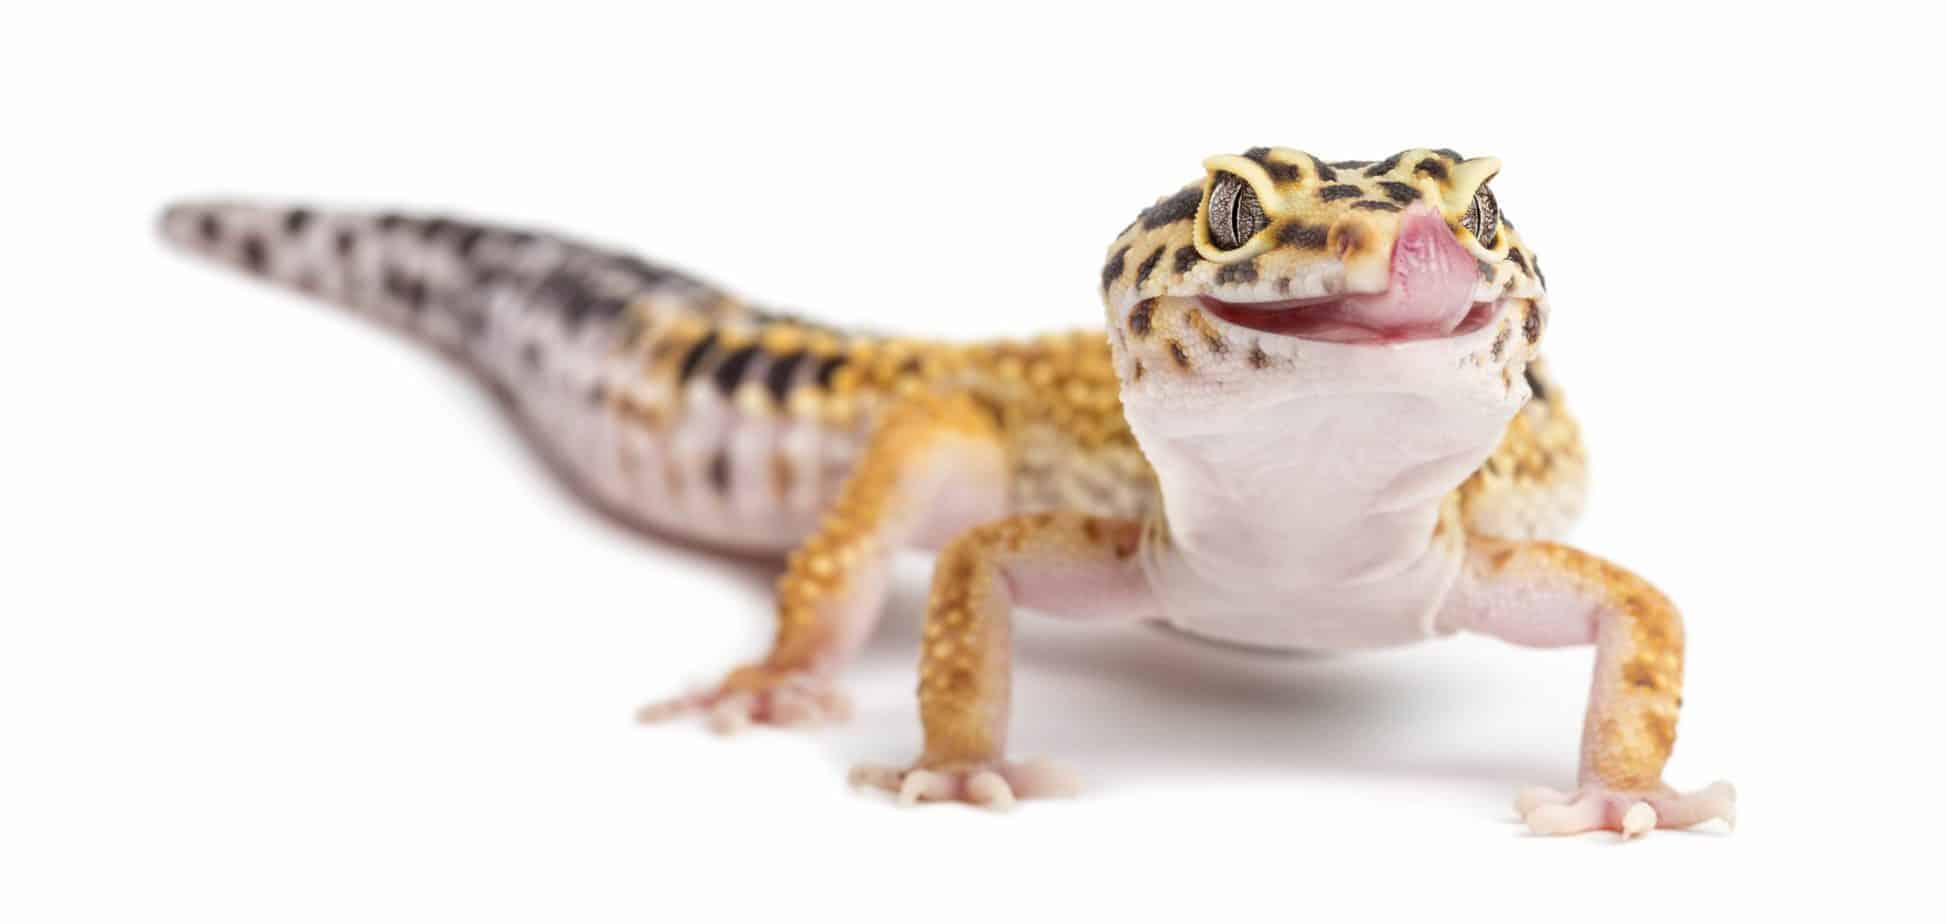 The 10 Best Lizards To Keep As Pets